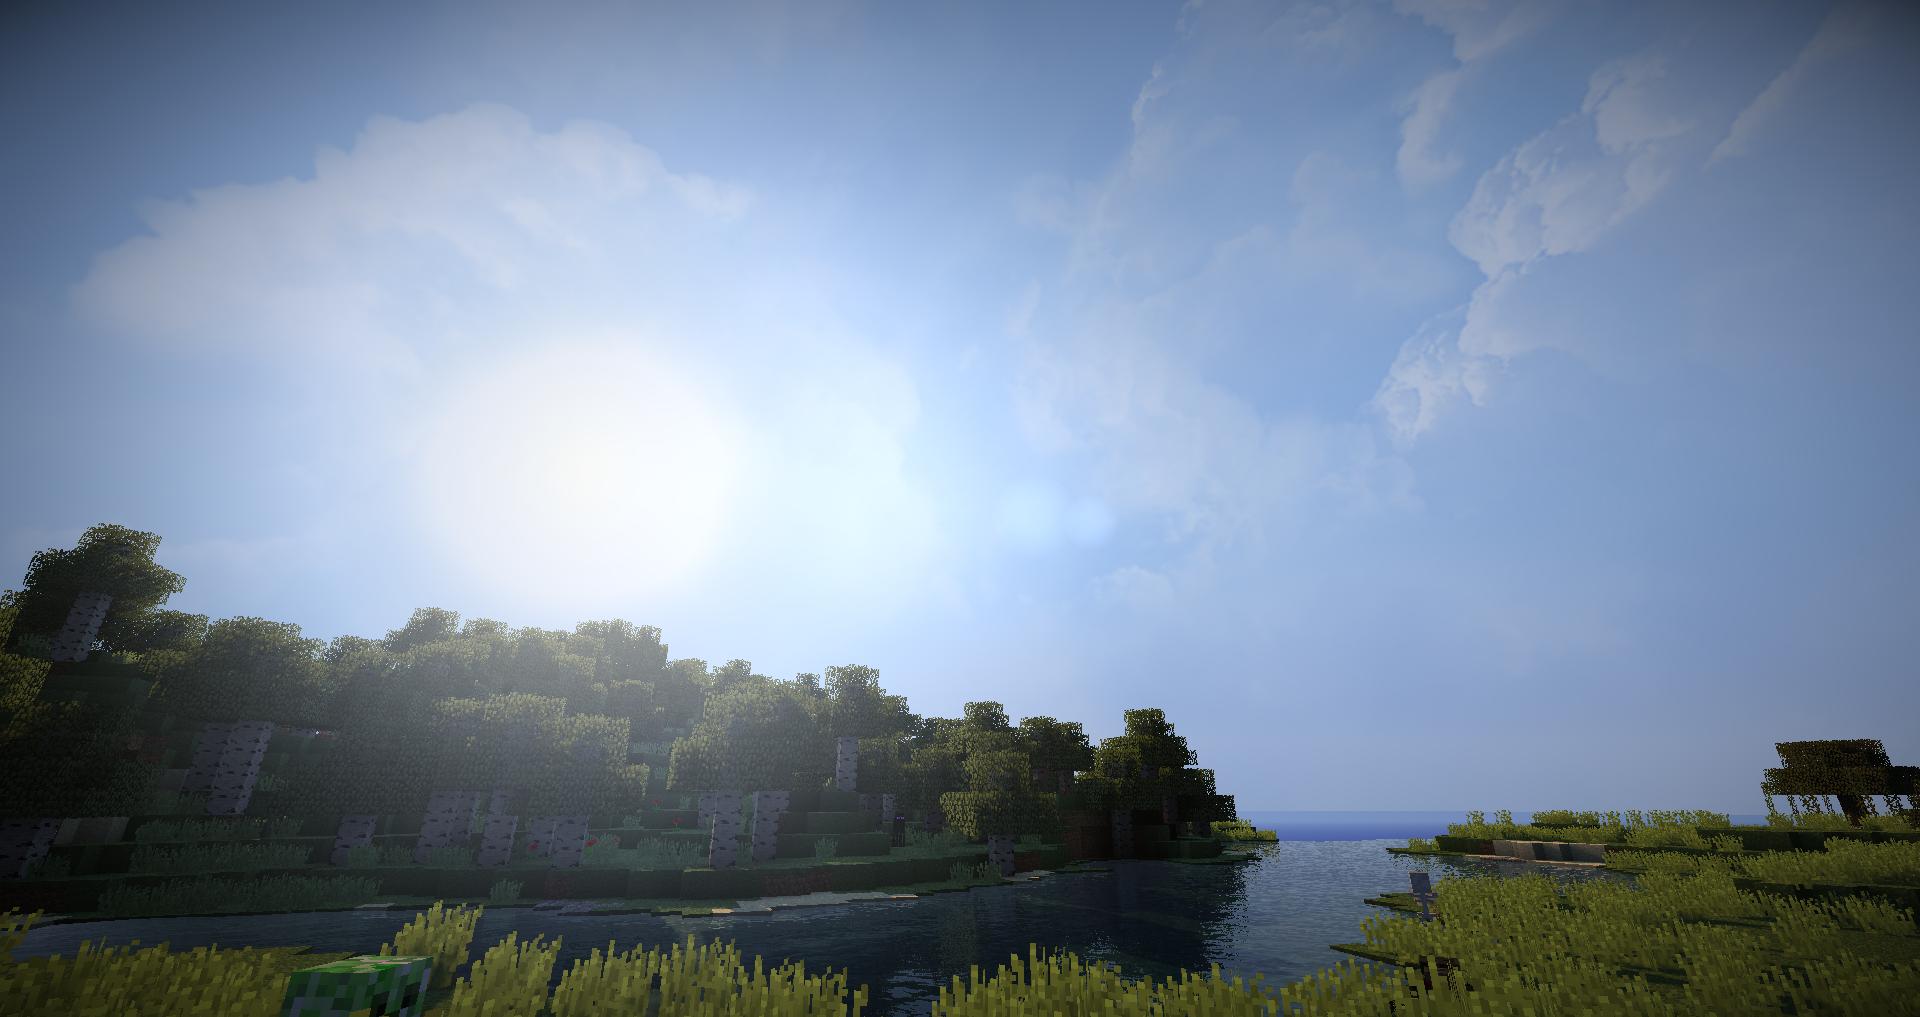 realistic minecraft texture pack that goes with shaders